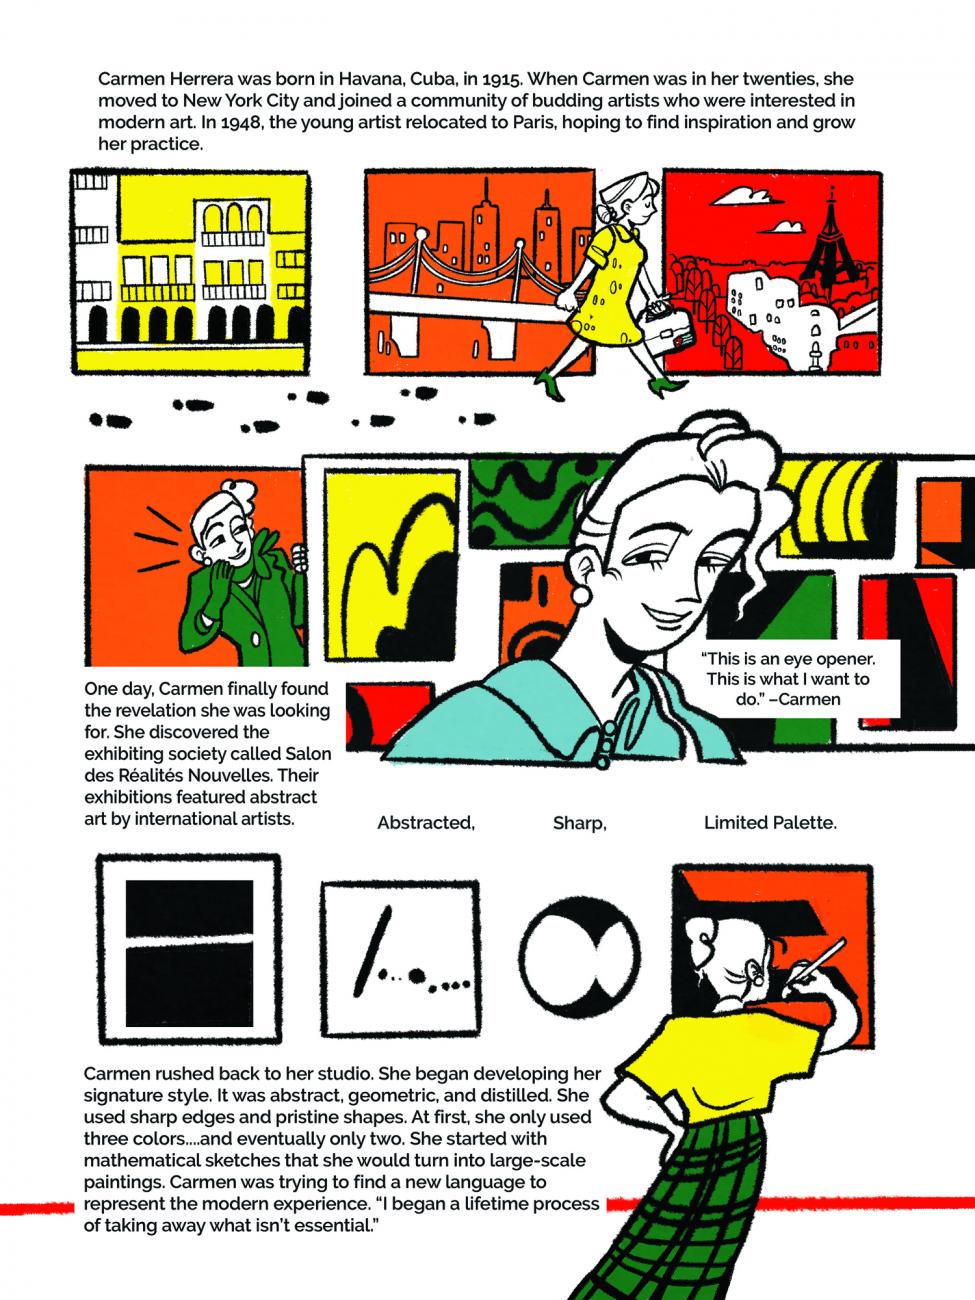 In Awe of the Straight Line: A Comic About Carmen Herrera, page one